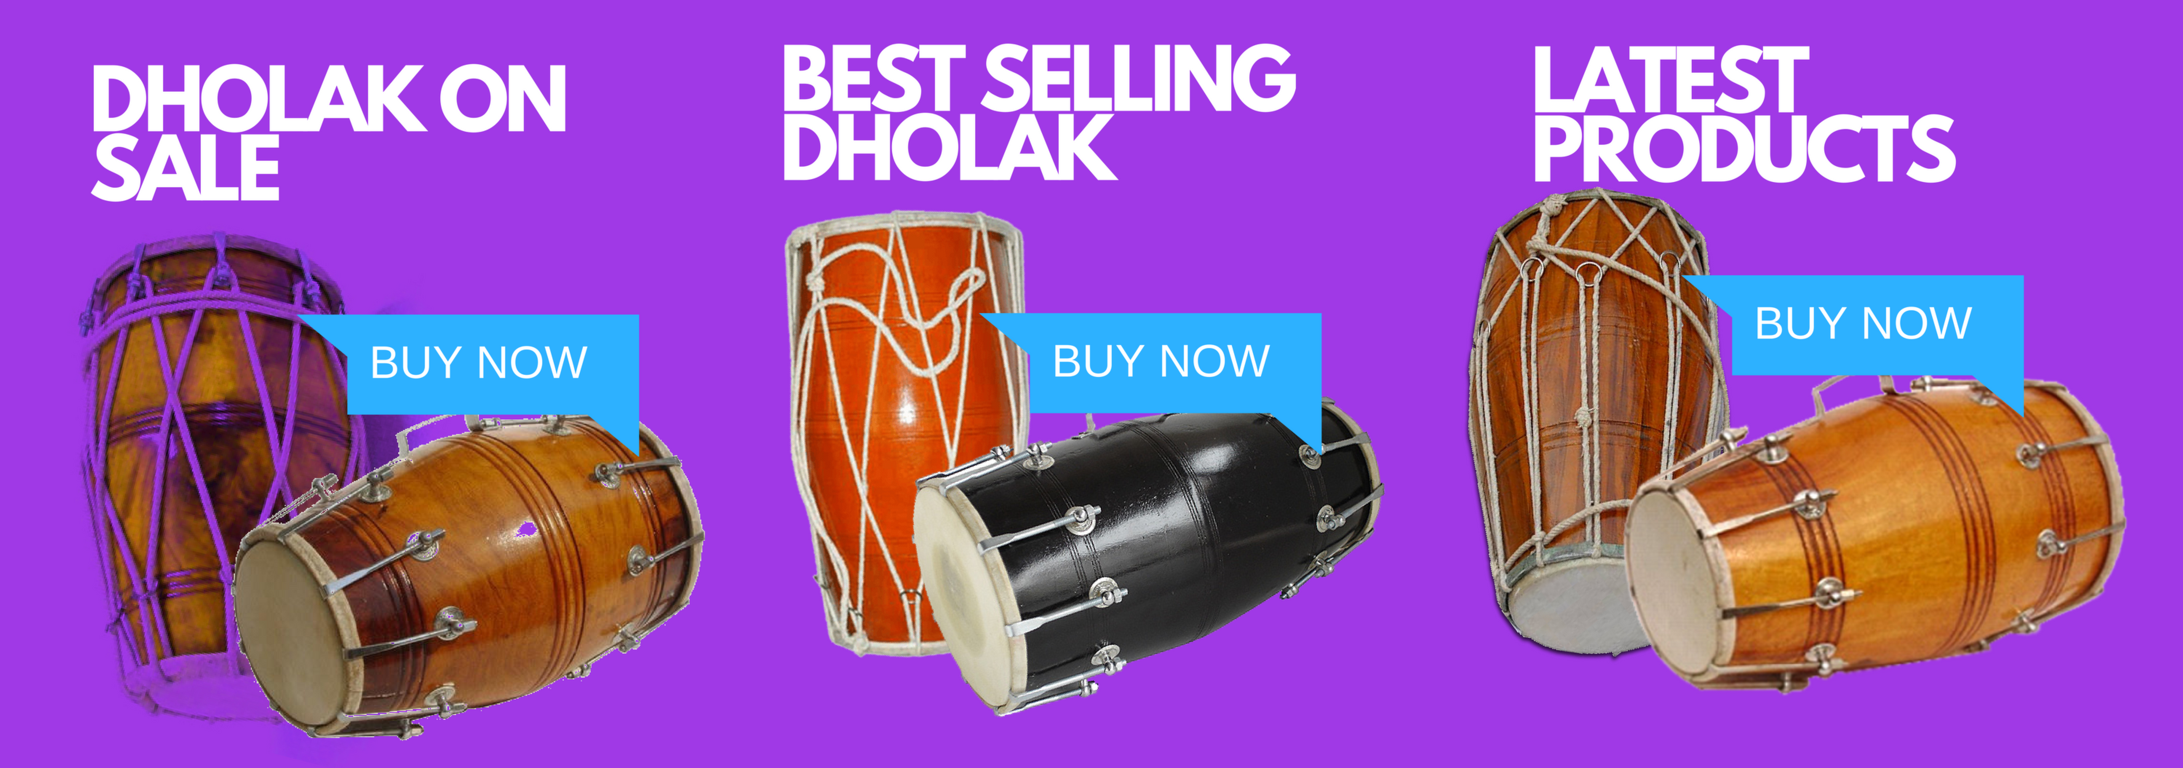 best-selling-dholak-dholak-discount-sale-latest-dholak-at-low-cost-price